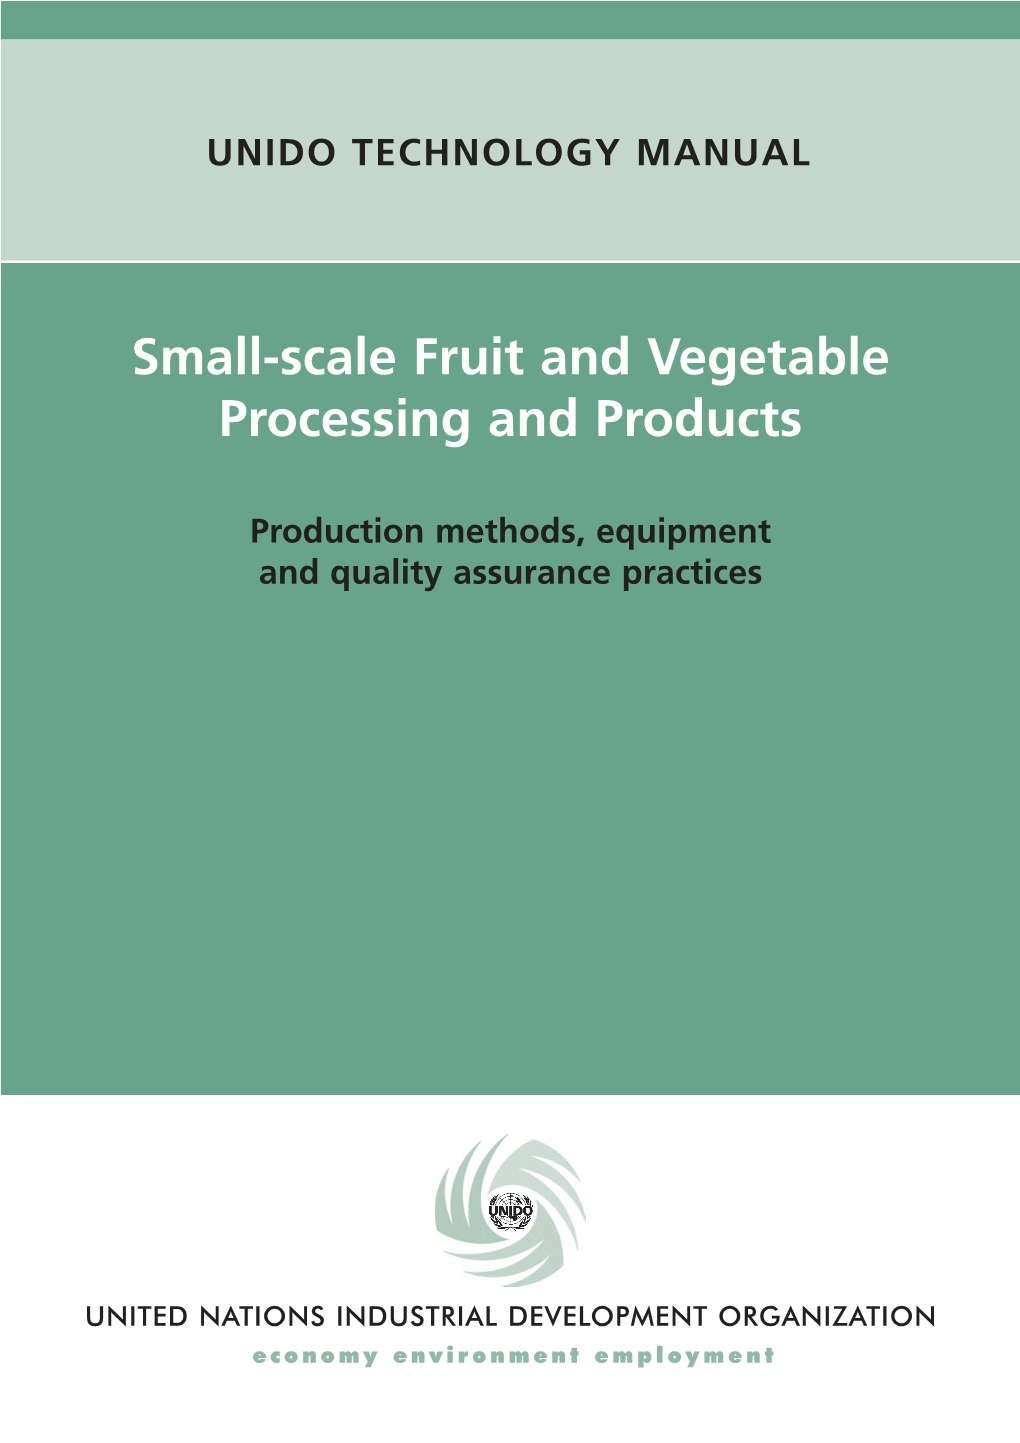 Small-Scale Fruit and Vegetable Processing and Products